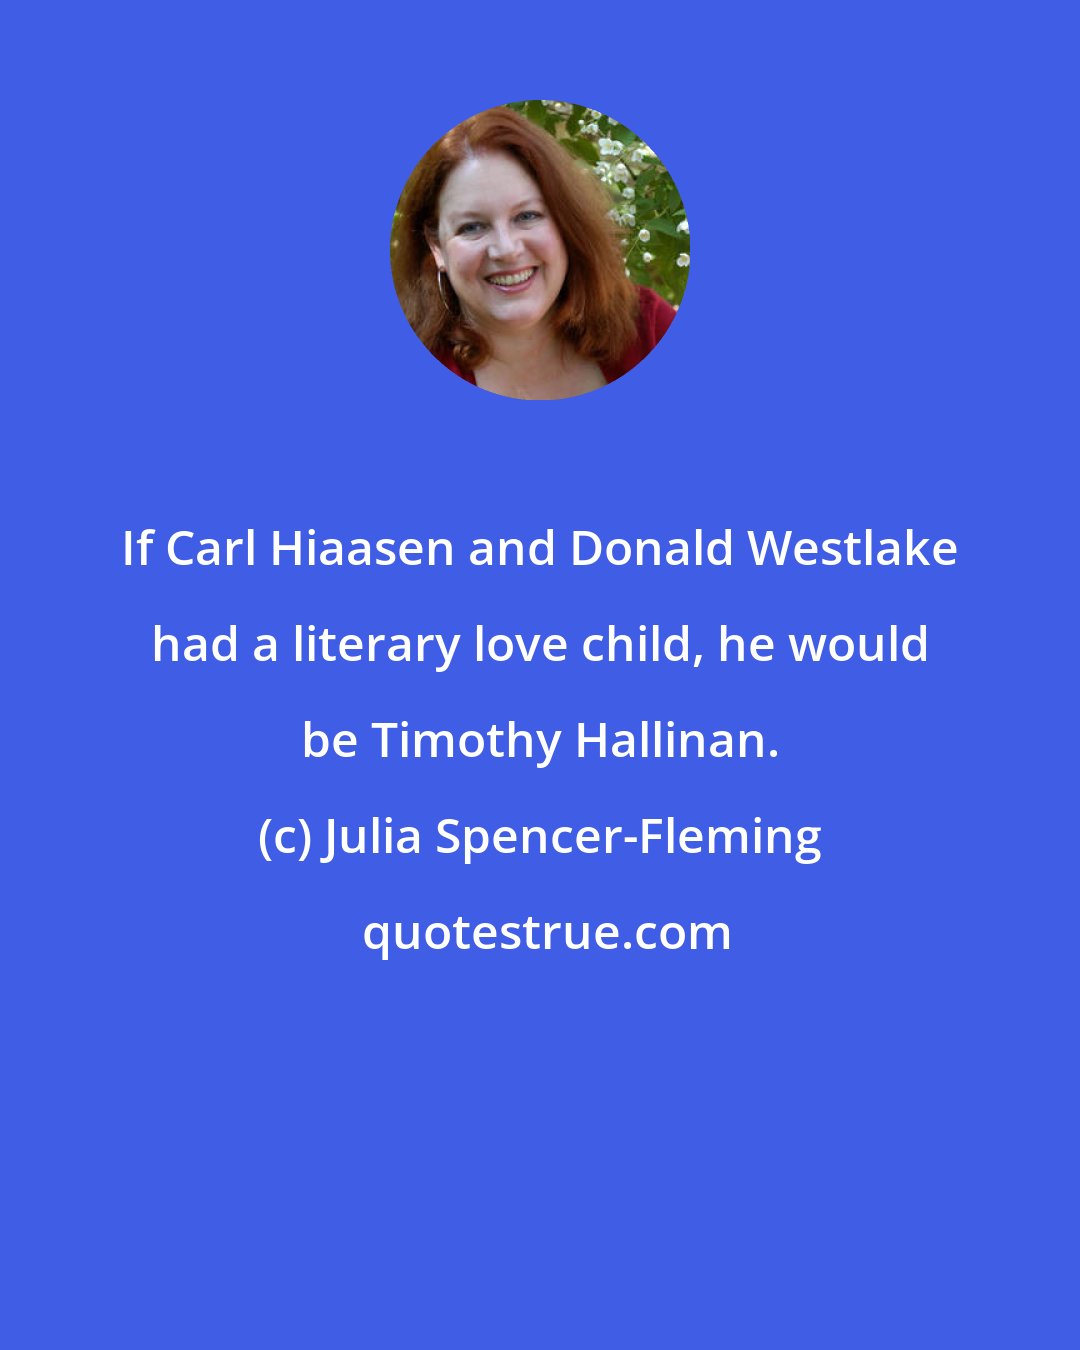 Julia Spencer-Fleming: If Carl Hiaasen and Donald Westlake had a literary love child, he would be Timothy Hallinan.